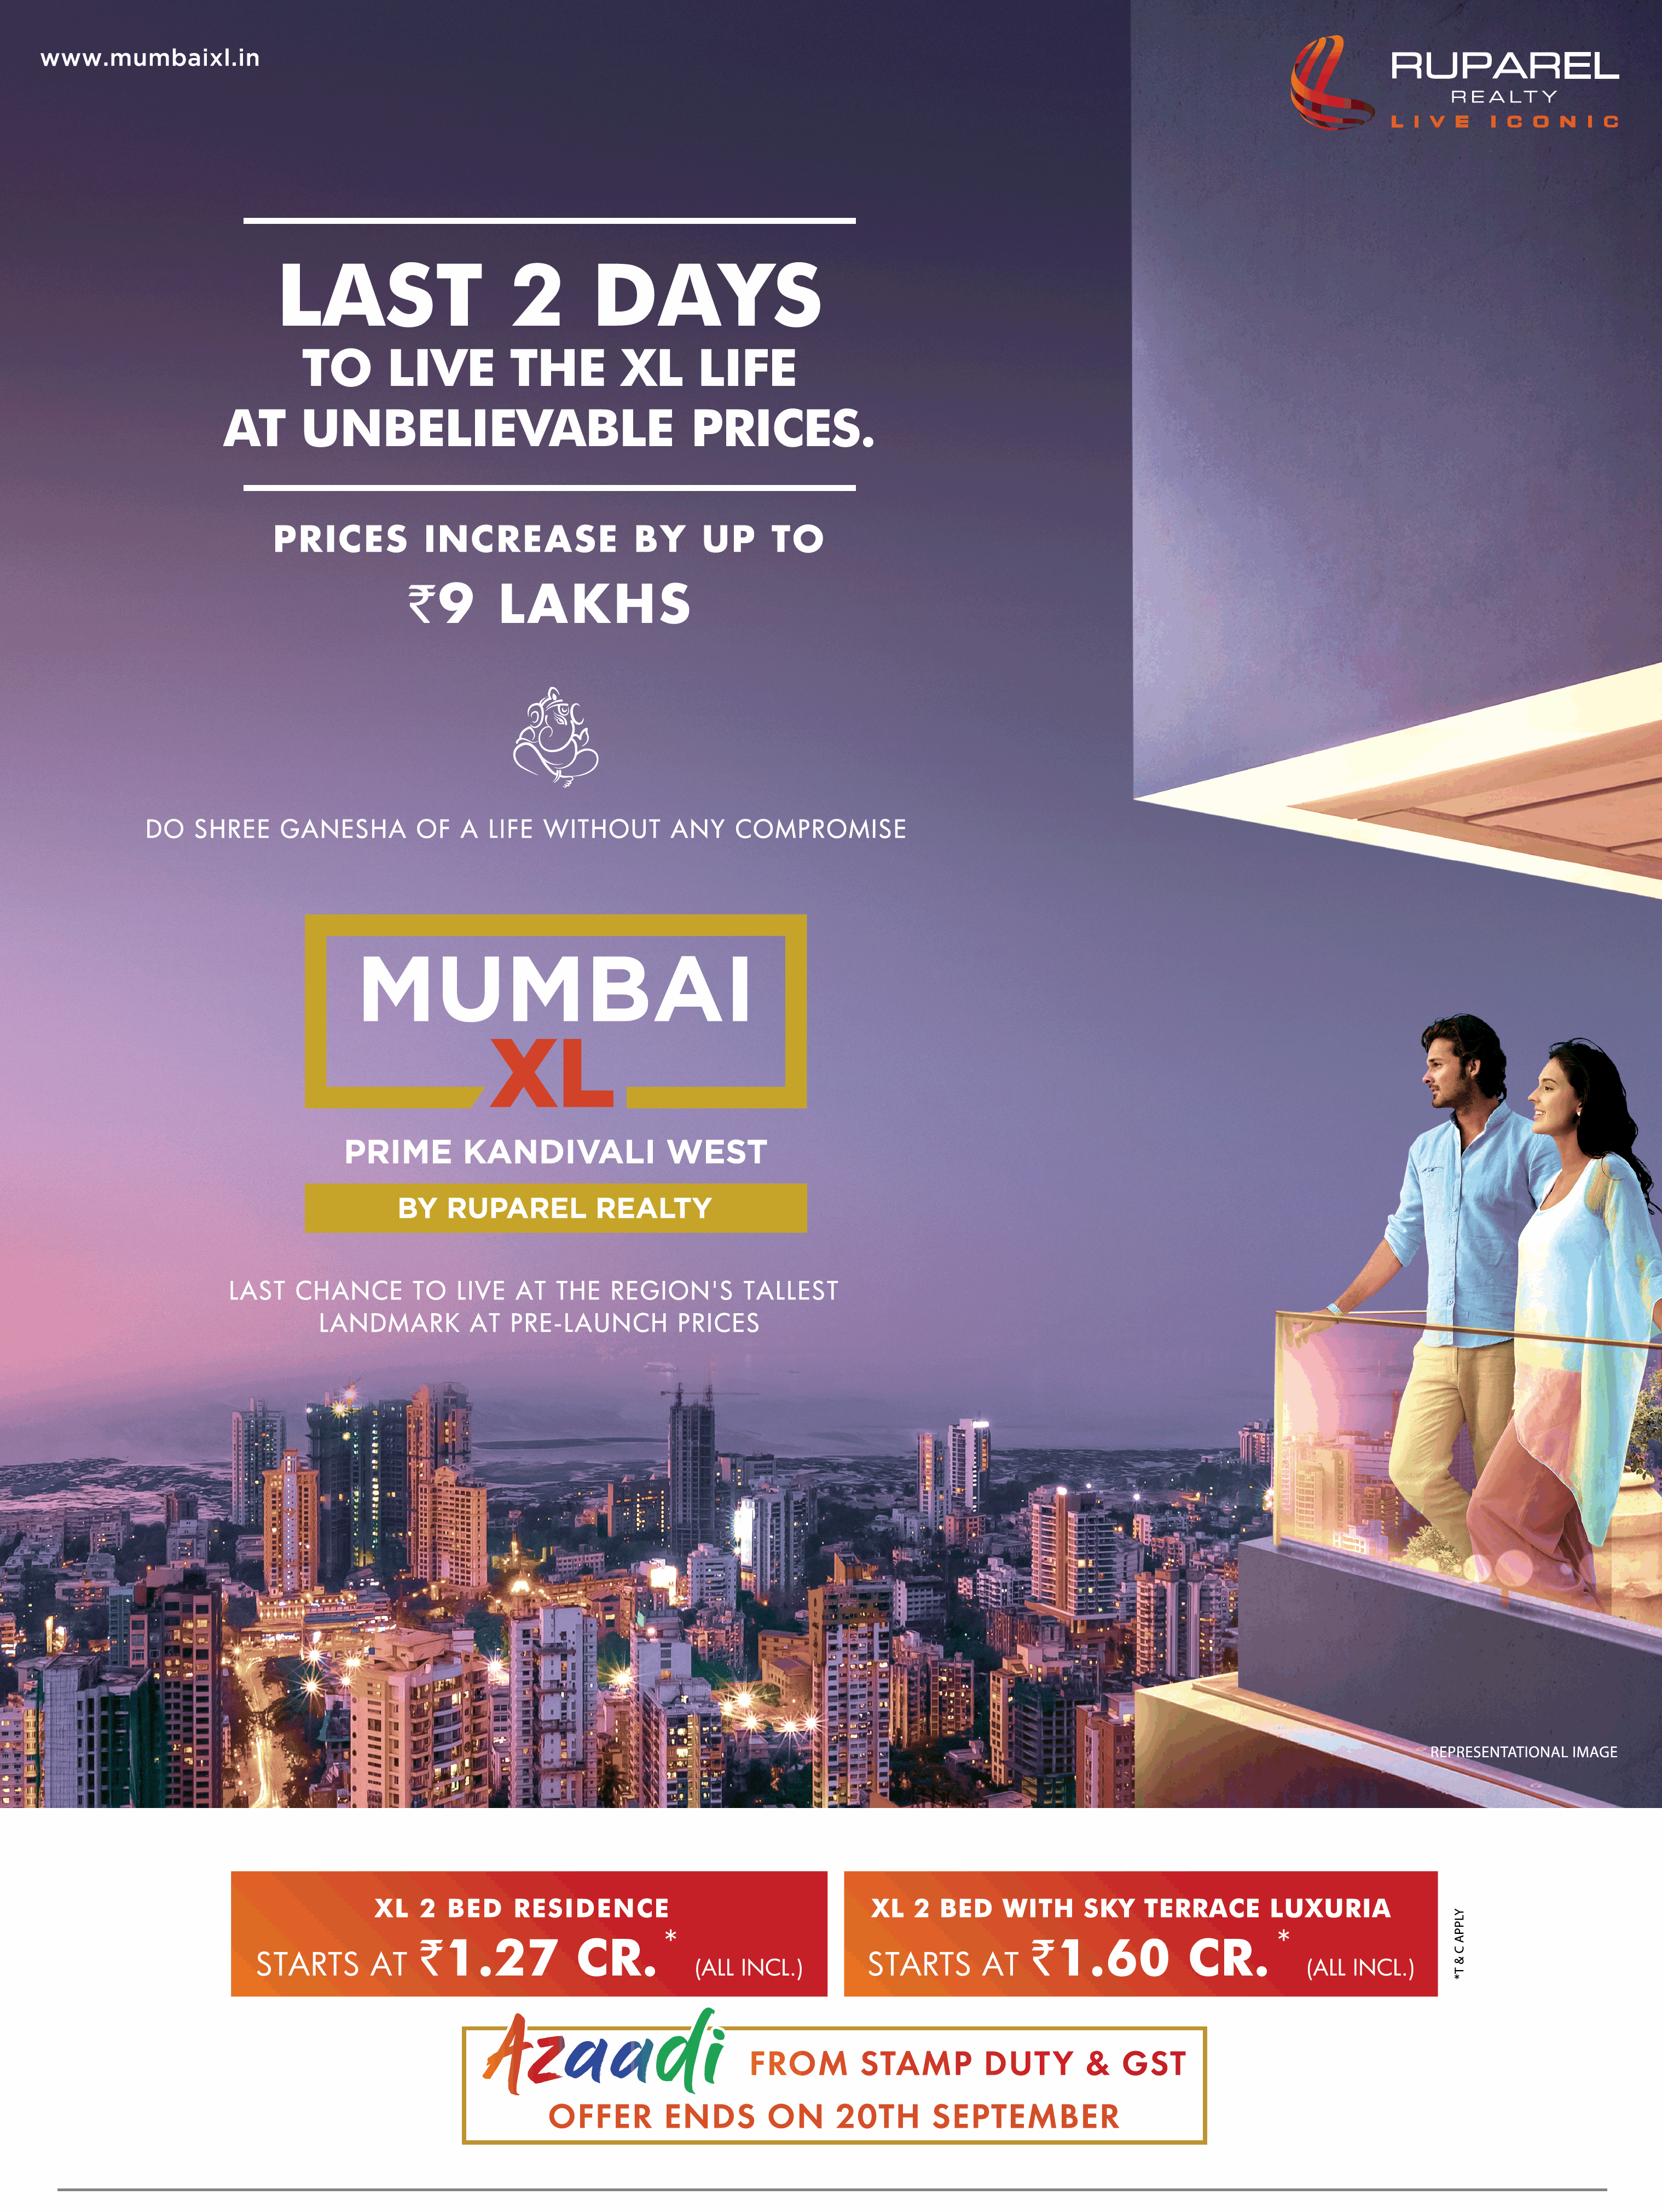 Ruparel Realty Offering XL 2 Bed Residence @ RS 1.27 cr. & XL 2 Bed with Sky Terrace Luxury @ Rs 1.60 cr. Update